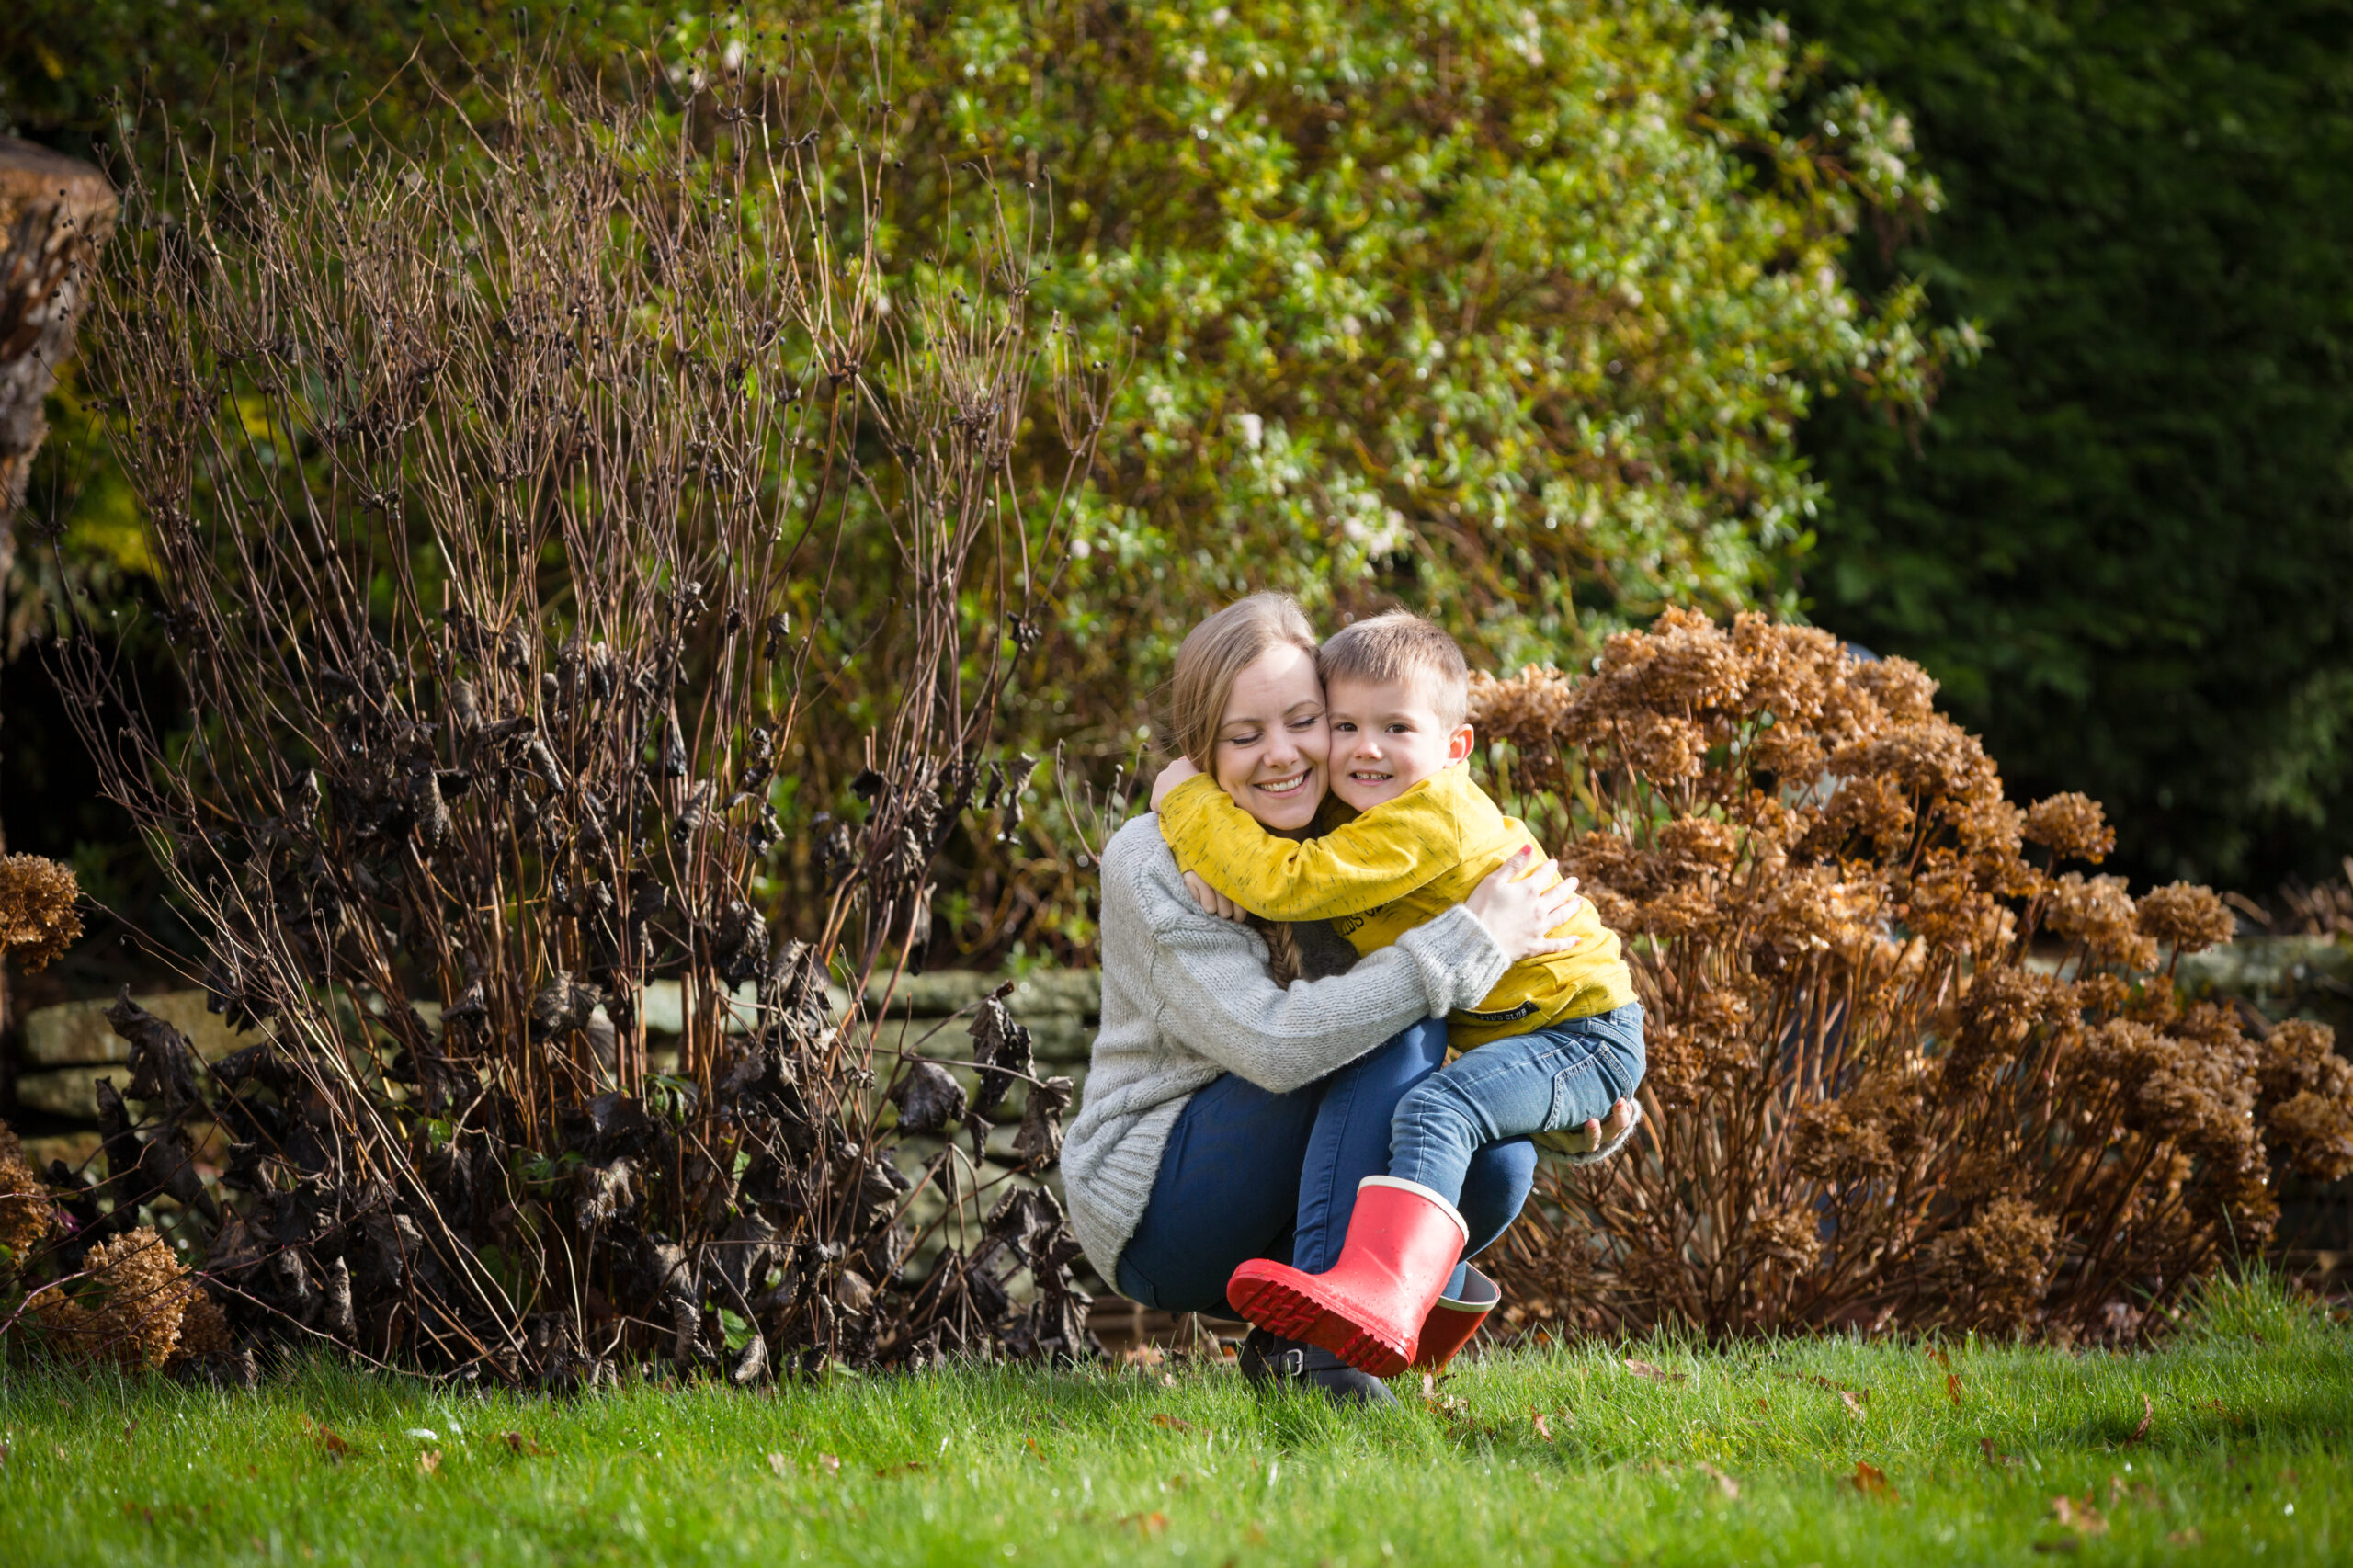 Mother and son having a hug - Family photography from Kathryn Goddard Photography